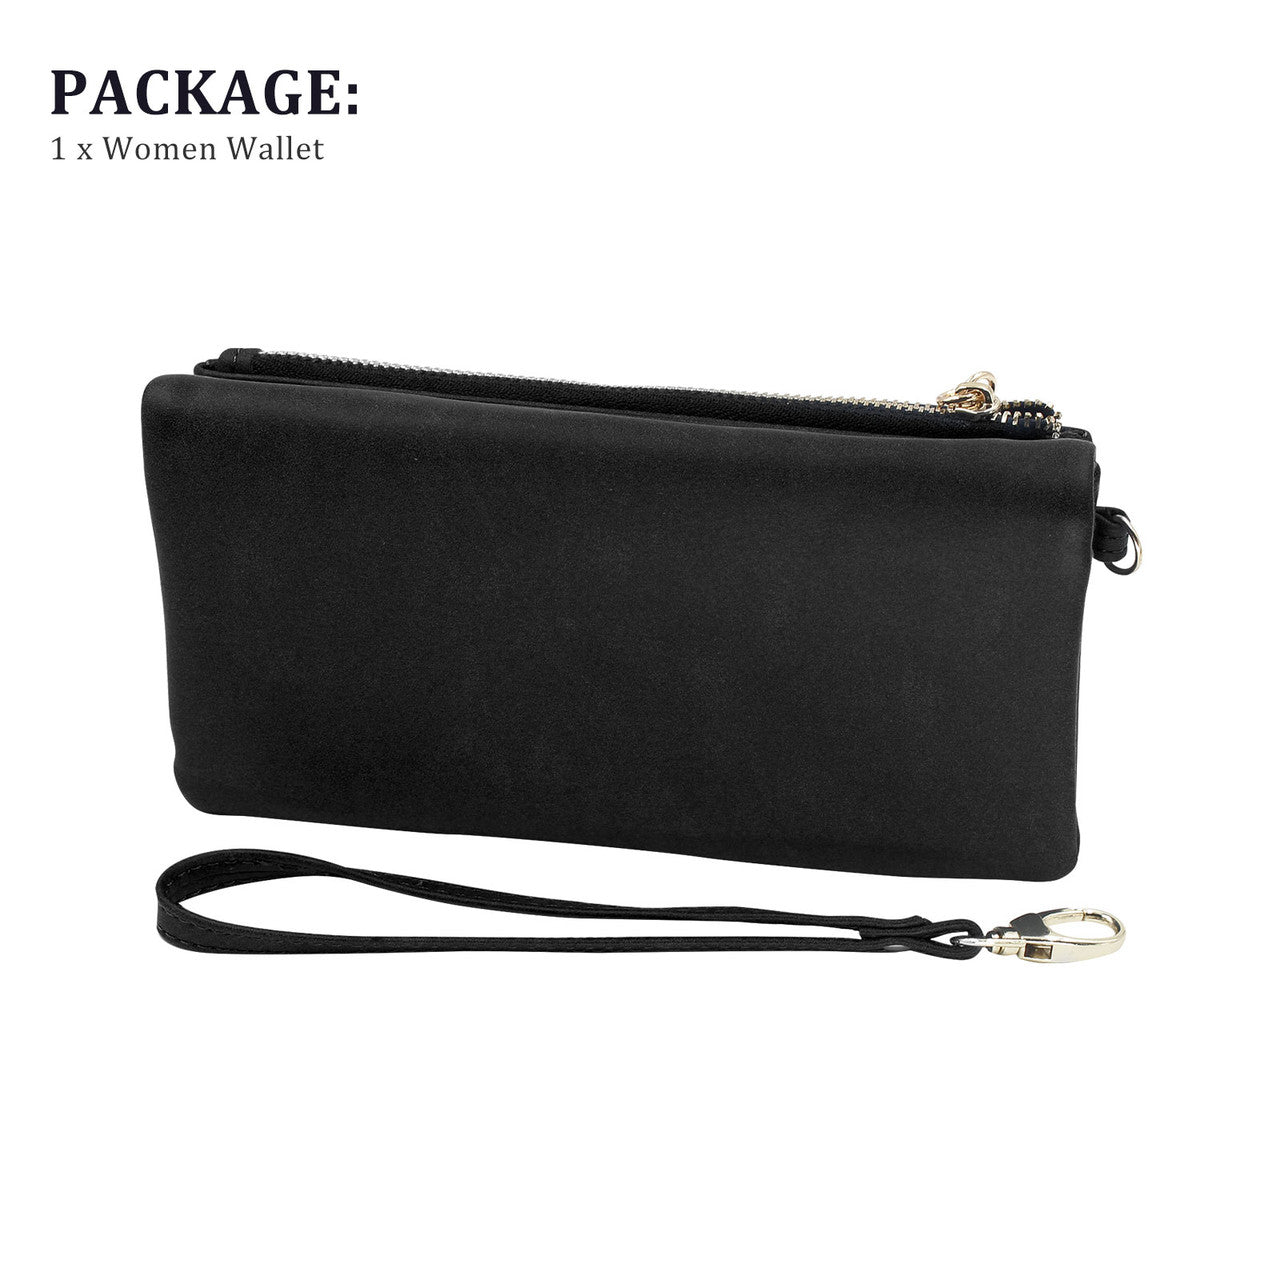 Women's PU Leather Wallet, Large Capacity Luxury Clutch Purse with Wristlet Strap, Durable Credit Card Organizer Holder Ladies Purse, Black